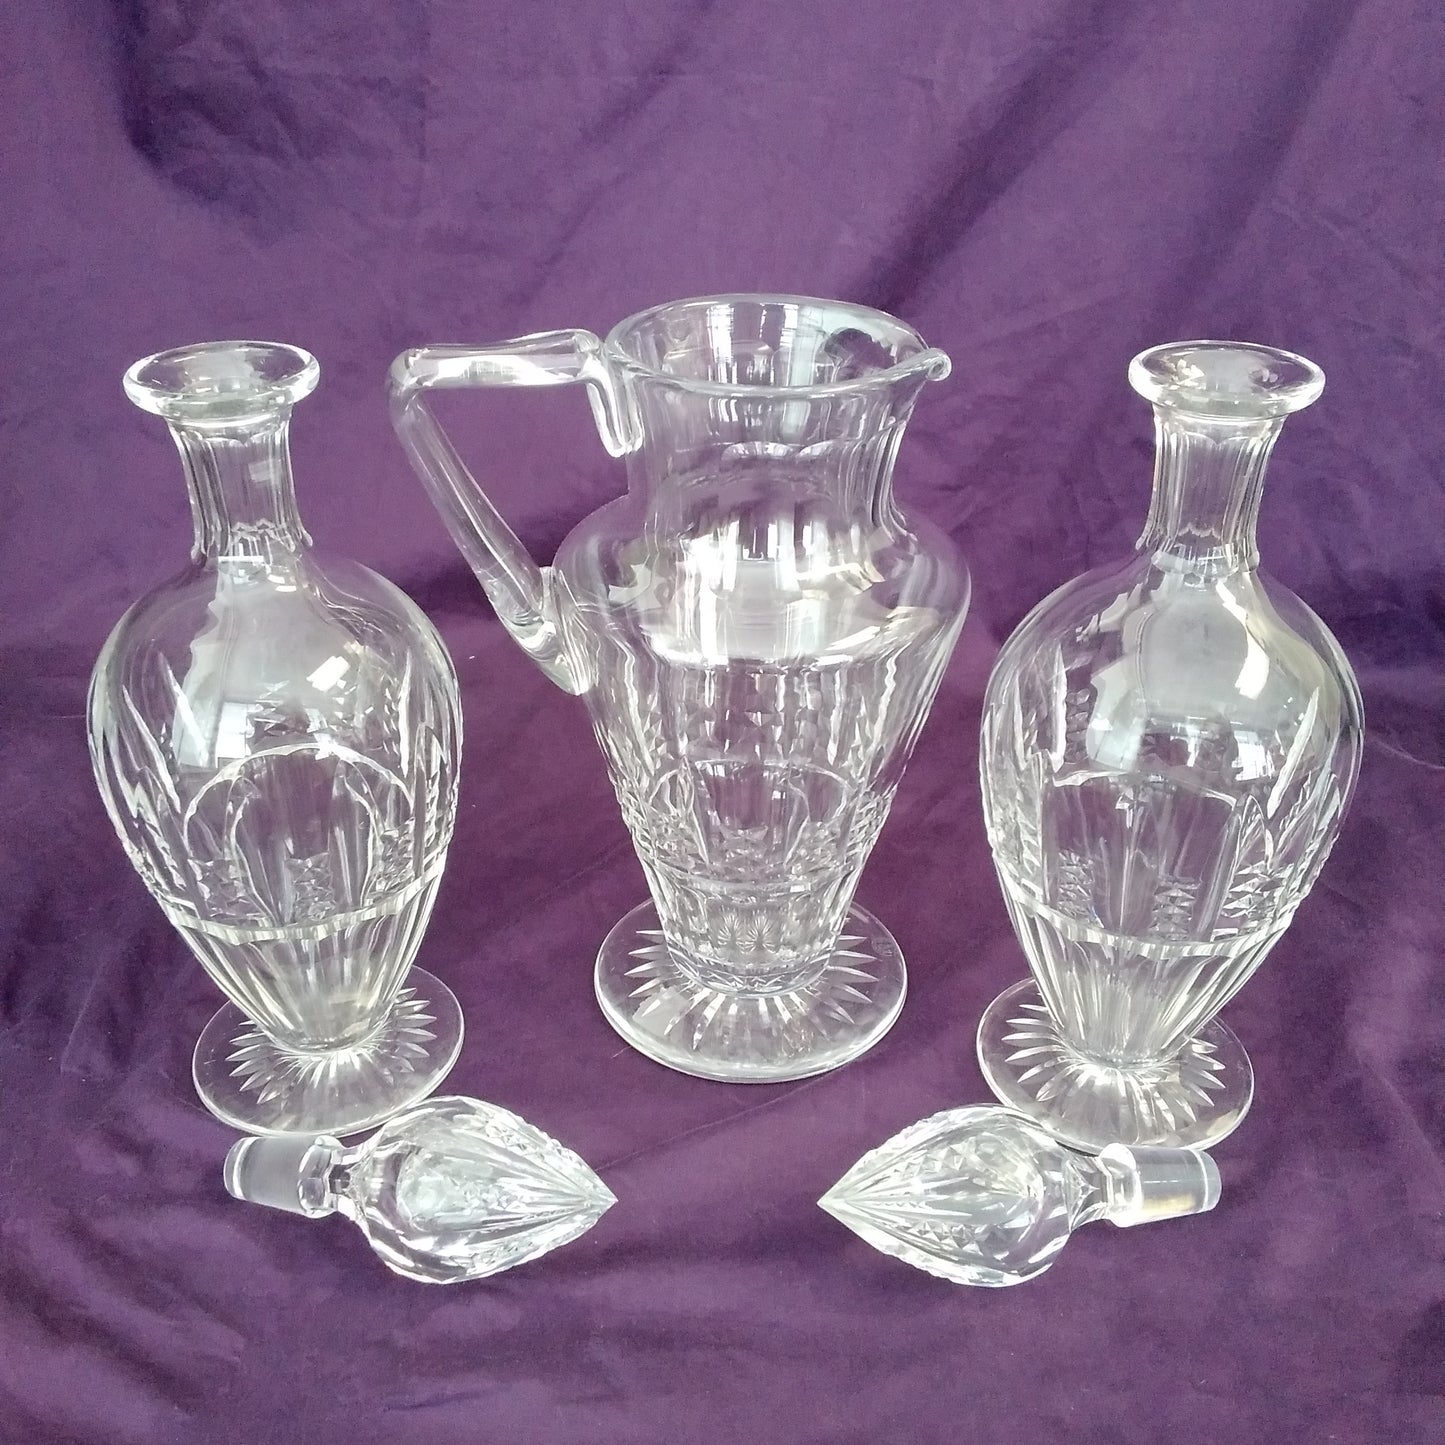 VTG - BACCARAT AUSTERLITZ - Pitcher and 2 Decanters with Stoppers Set